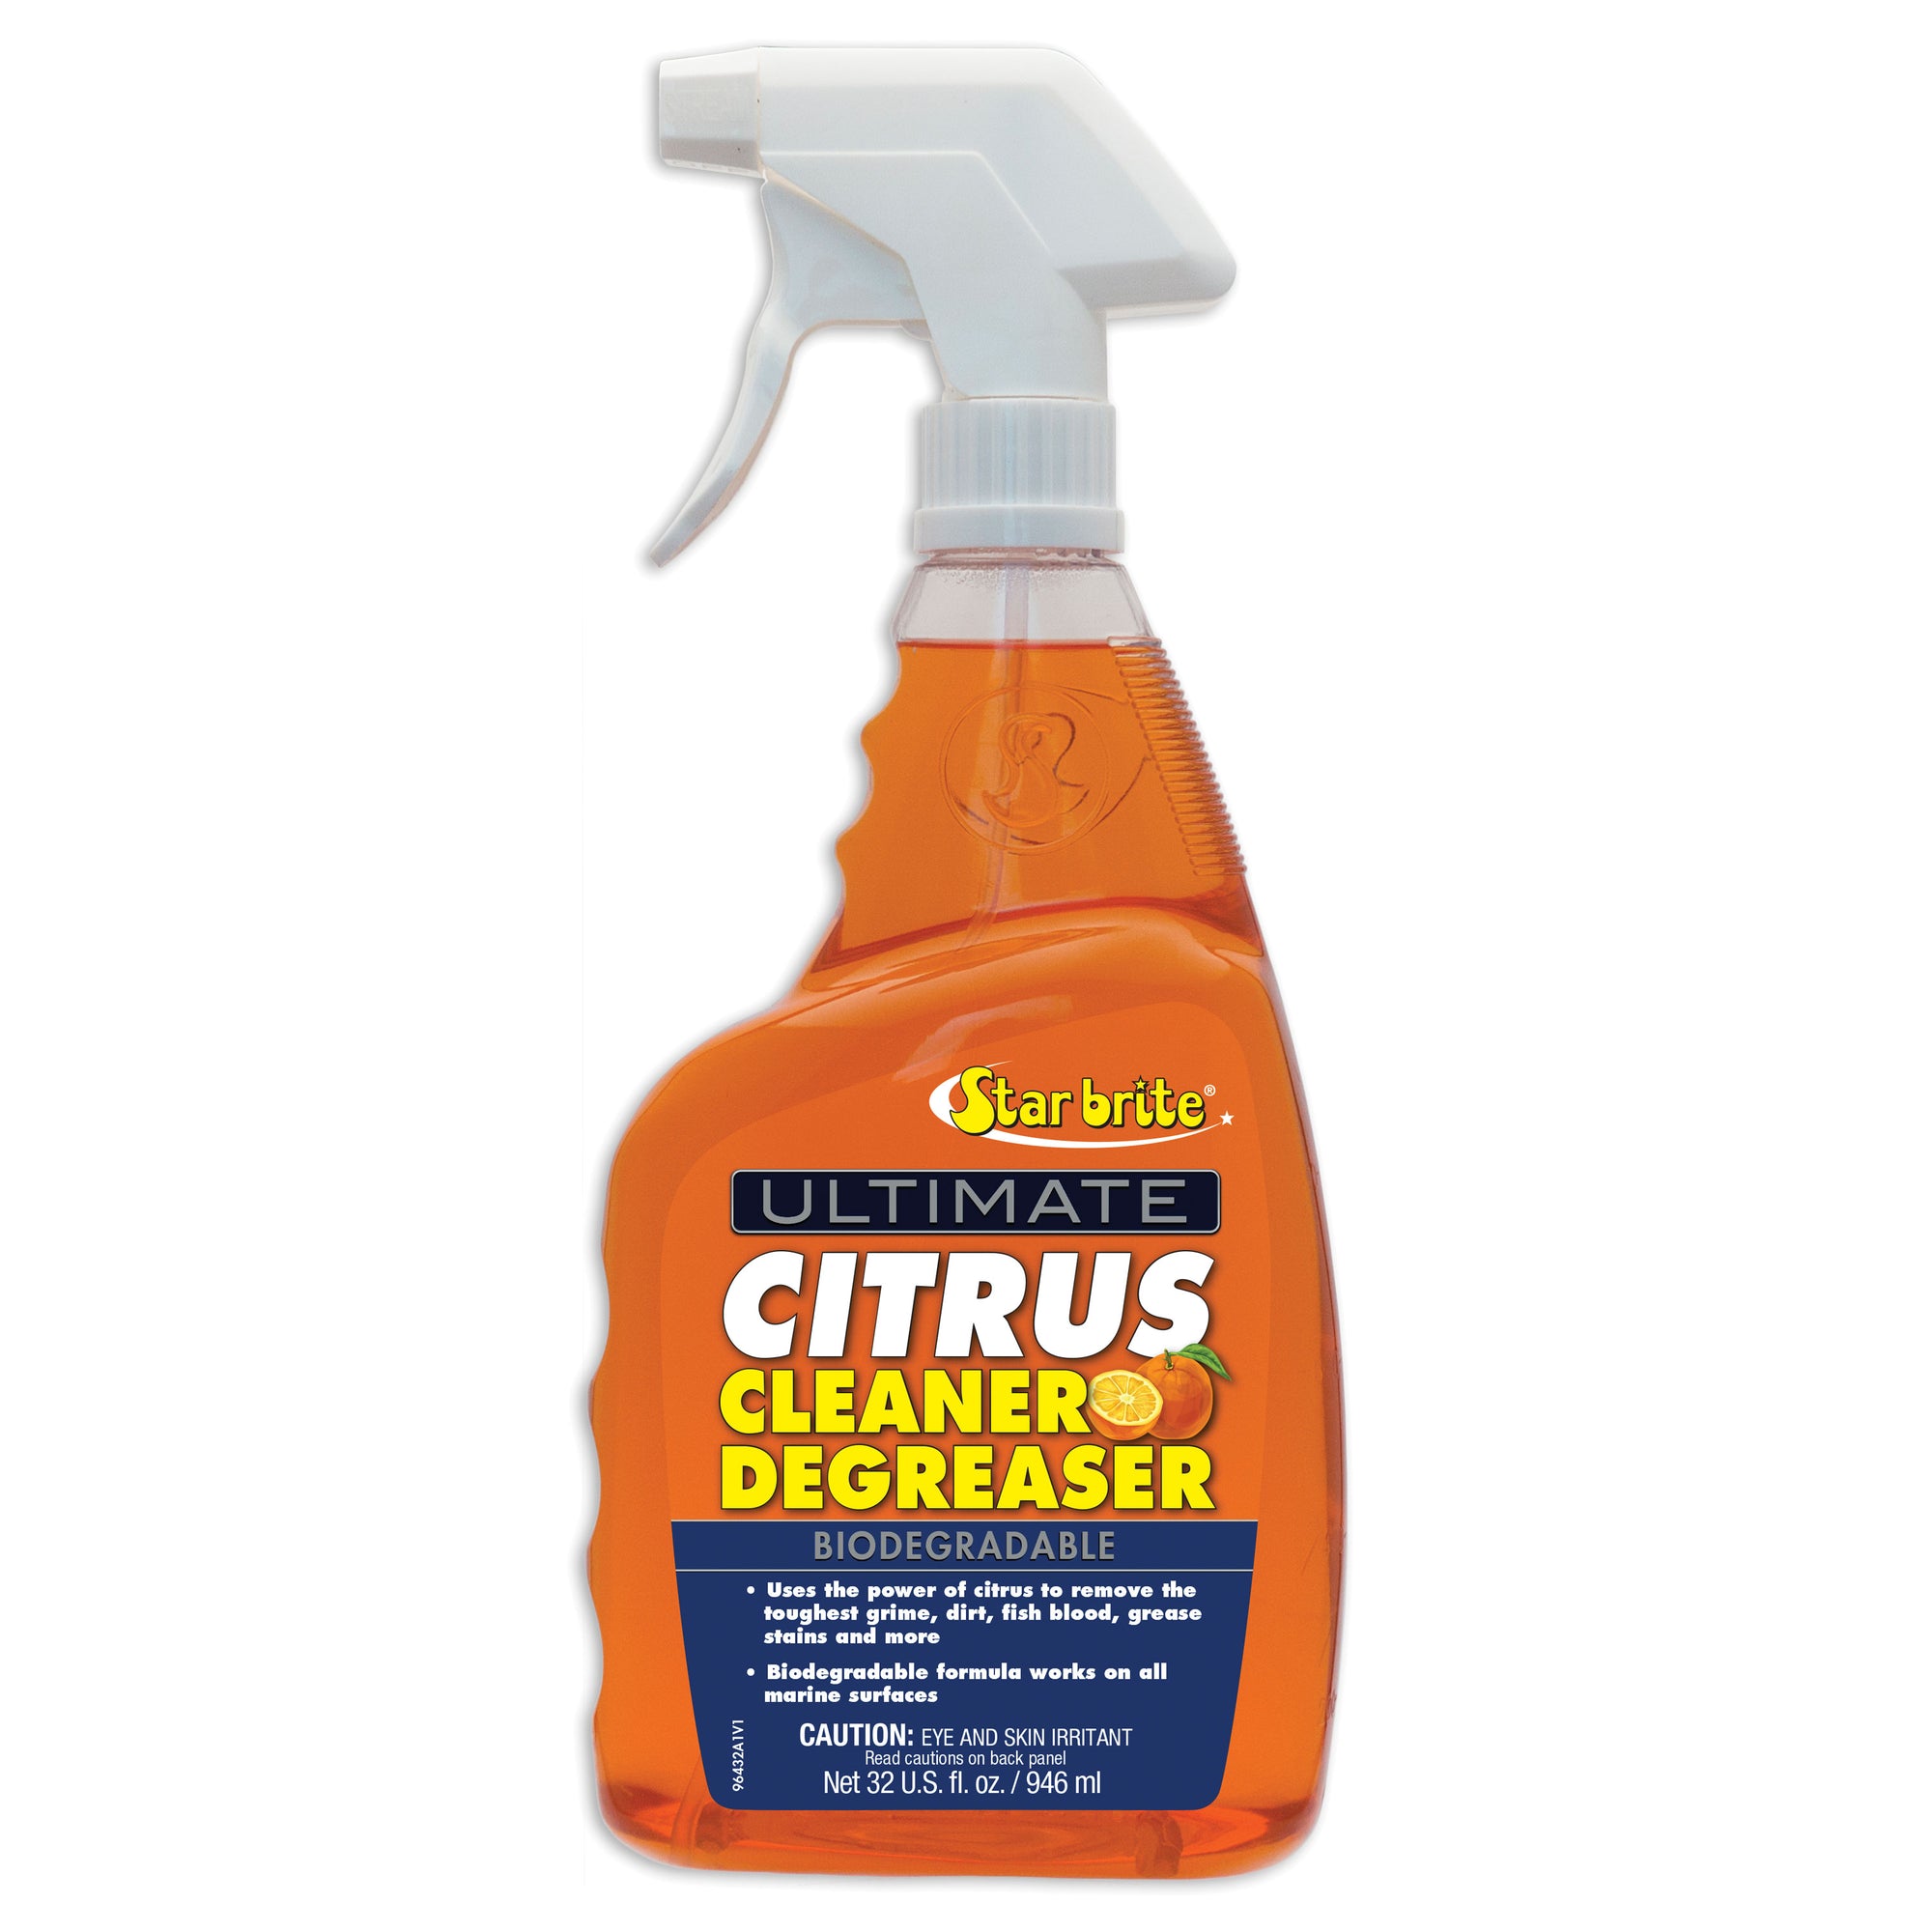 Star brite 096432 Ultimate Citrus Cleaner and Degreaser - 32 oz